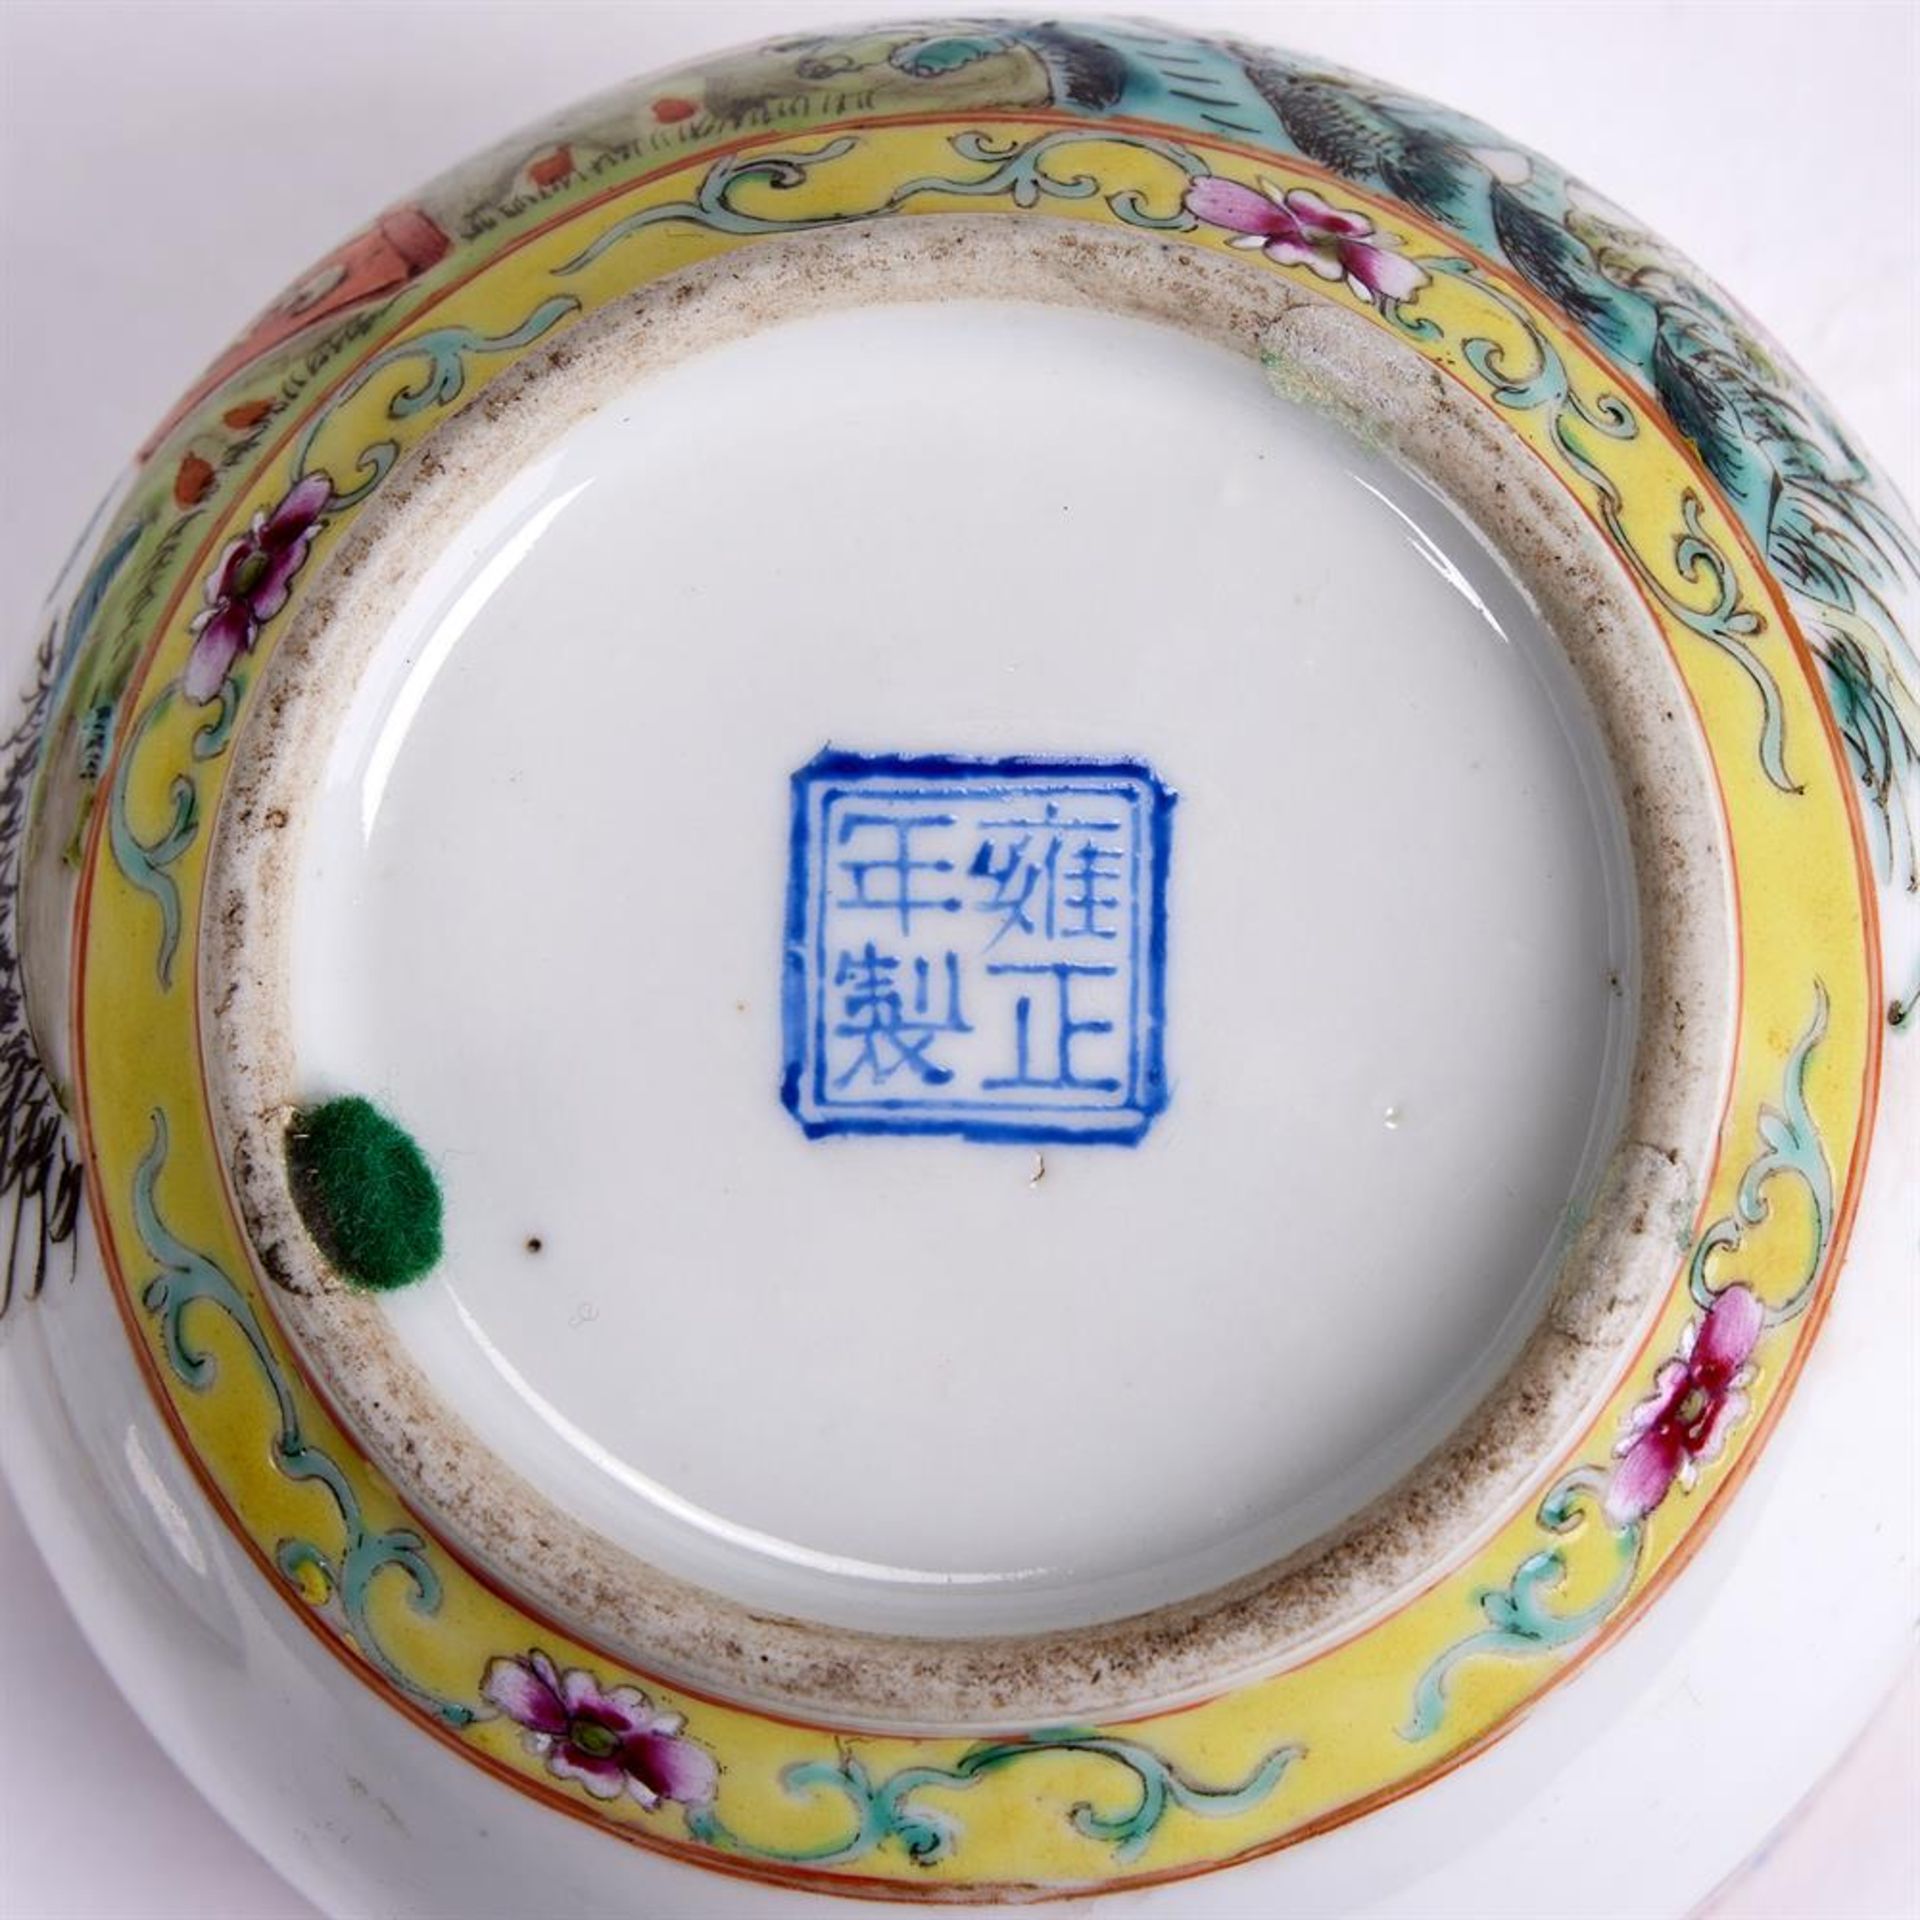 A CHINESE PORCELAIN COVERED BOWL, 20TH CENTURY - Image 2 of 2